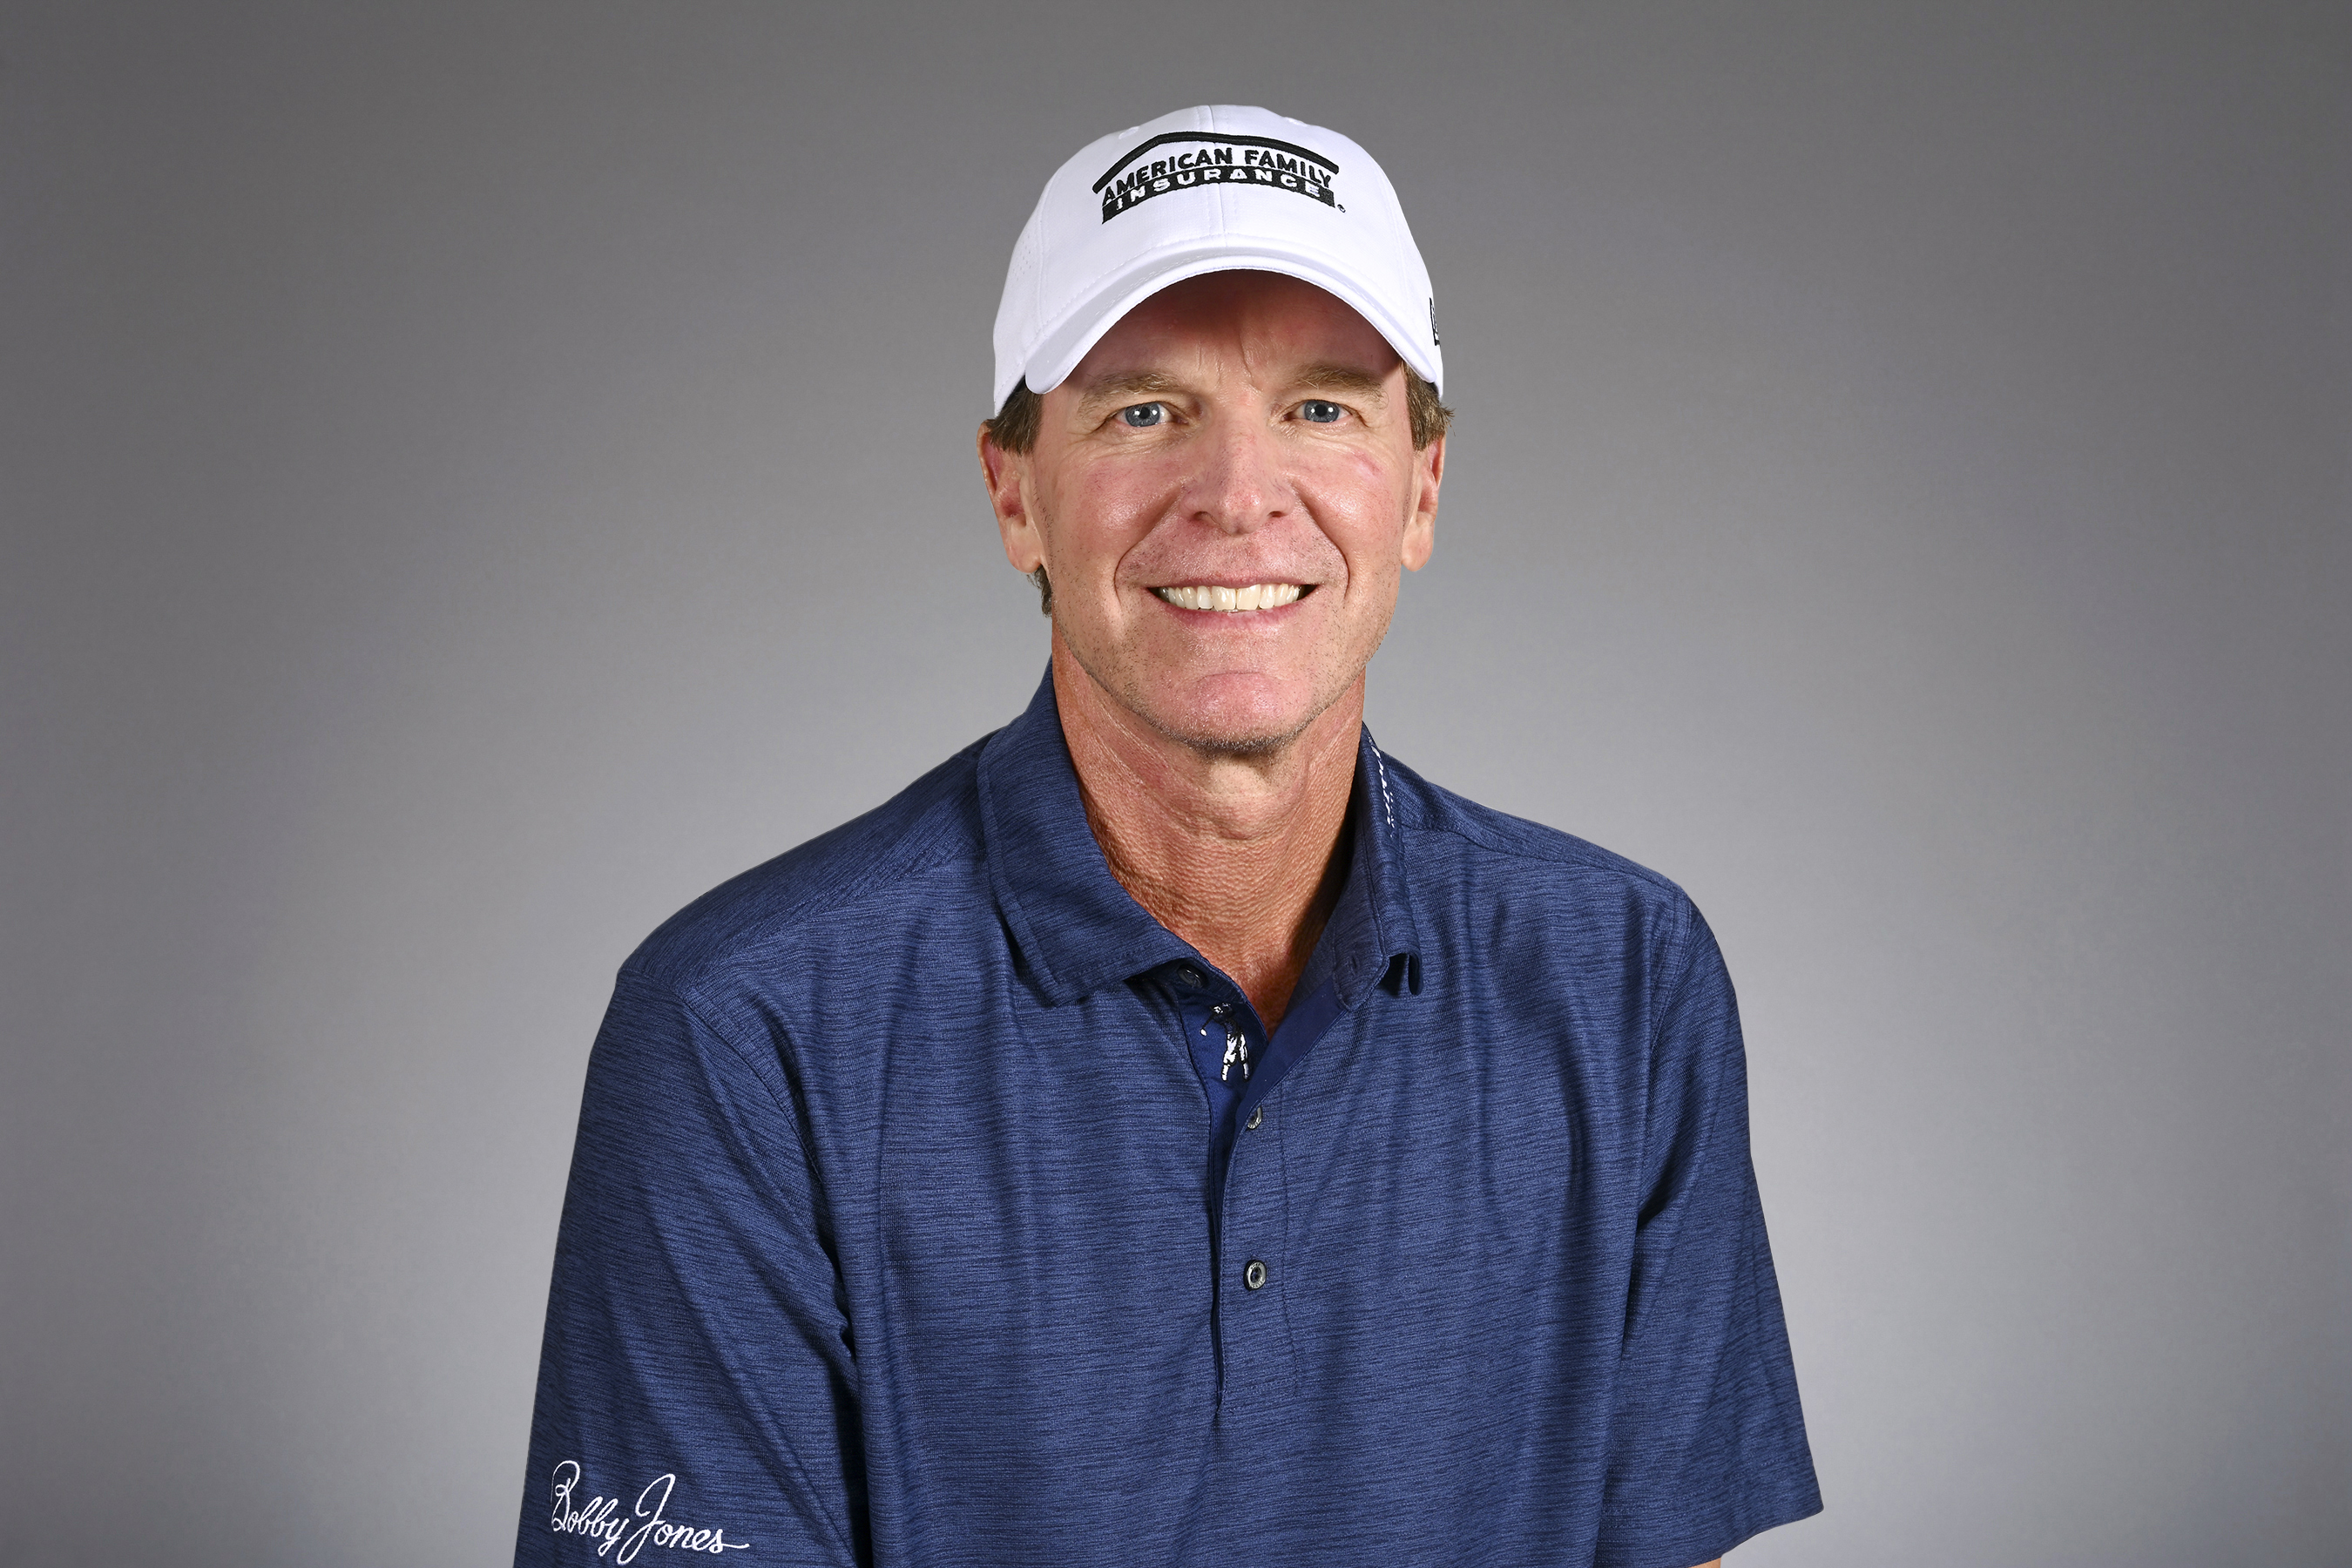 Steve Stricker current official PGA TOUR headshot. (Photo by Tracy Wilcox/PGA TOUR via Getty Images)